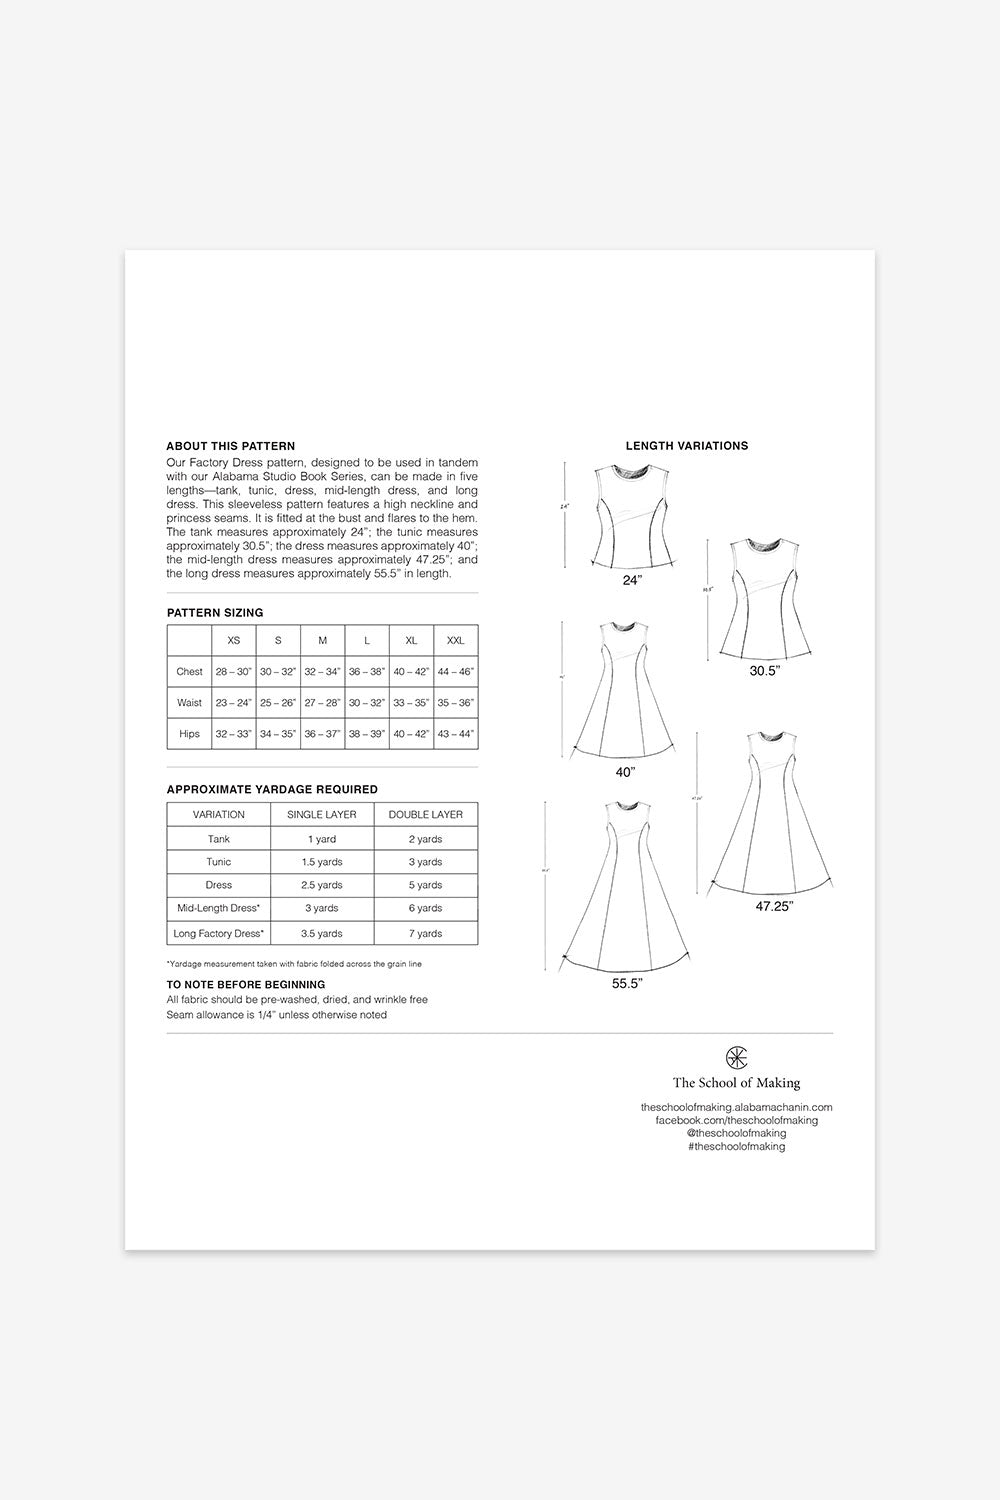 The School of Making Factory Dress Pattern Maker Supplies for DIY Clothing